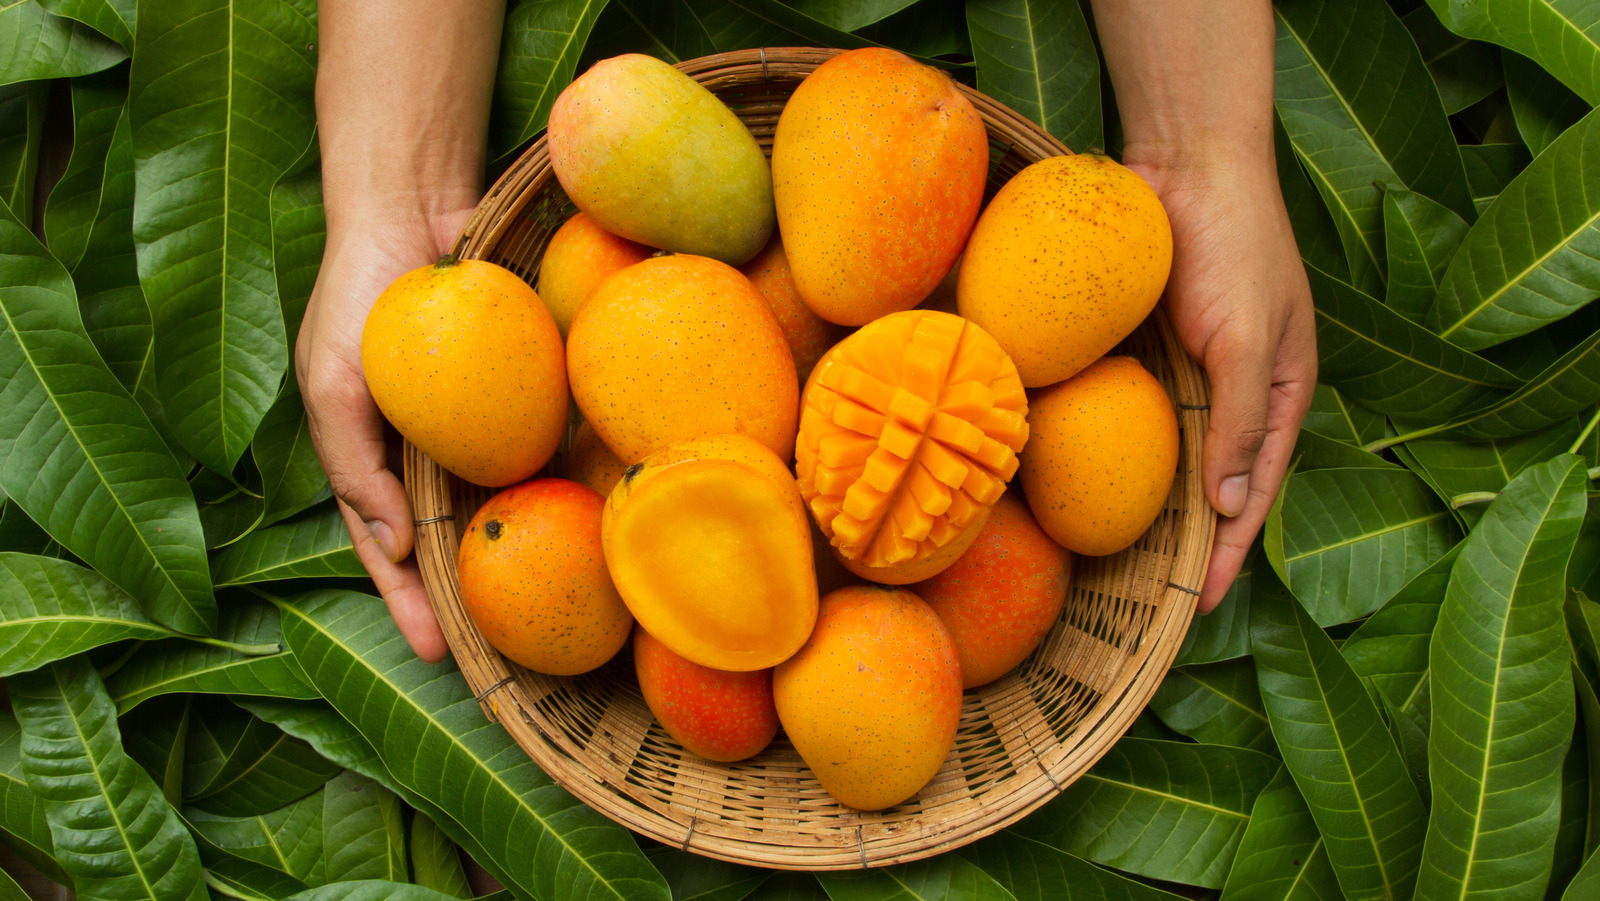 Why You Shouldn't Rely On Color To Tell If A Mango Is Ripe